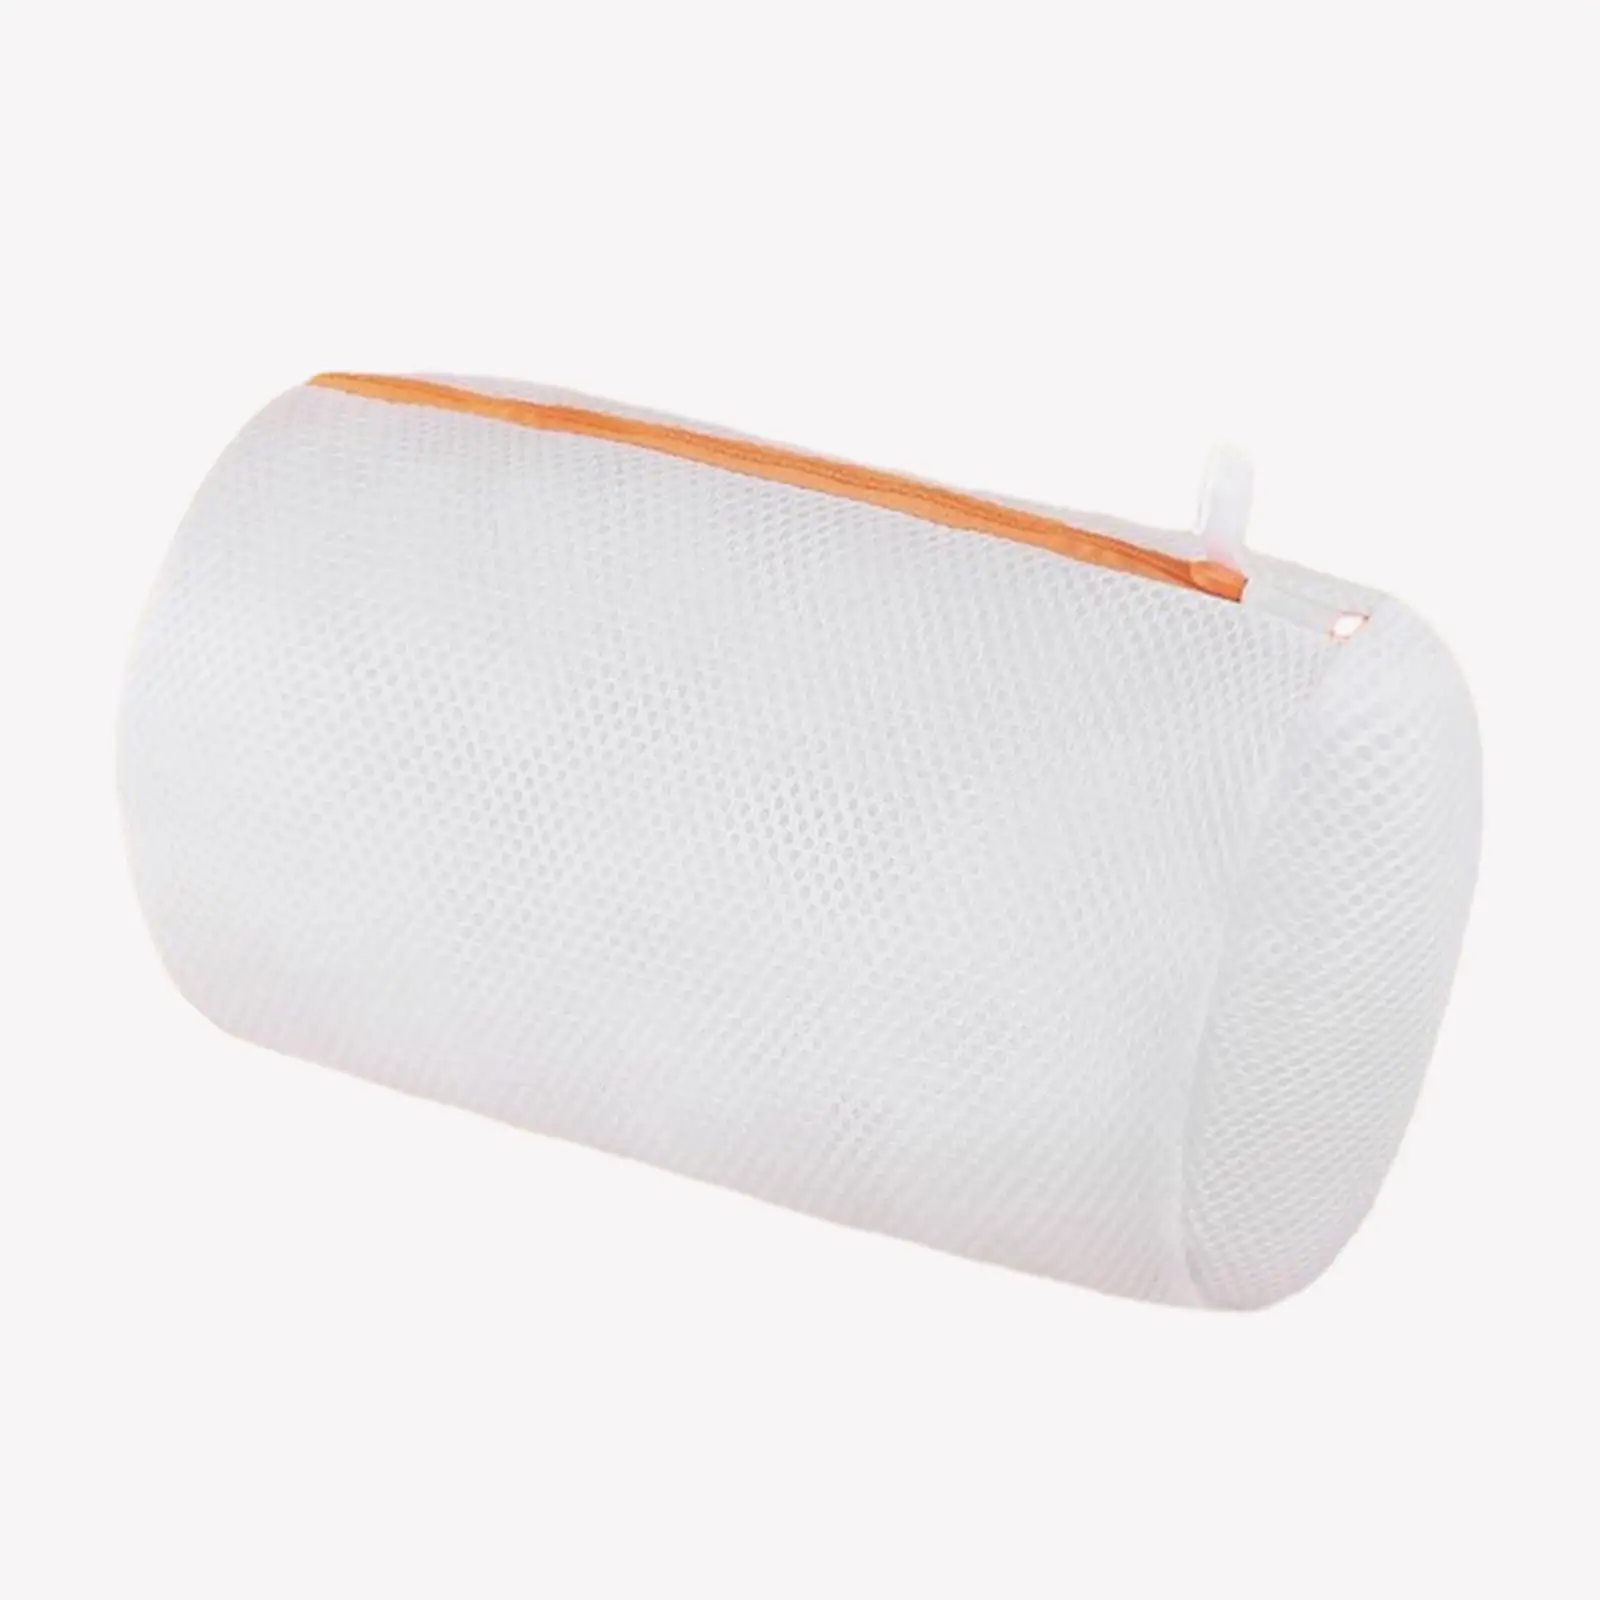 Mesh Laundry Washing Bags Protective Organizer with Zipper Washing Machine Wash Bag for Underwear Home Travel Bra Lingerie